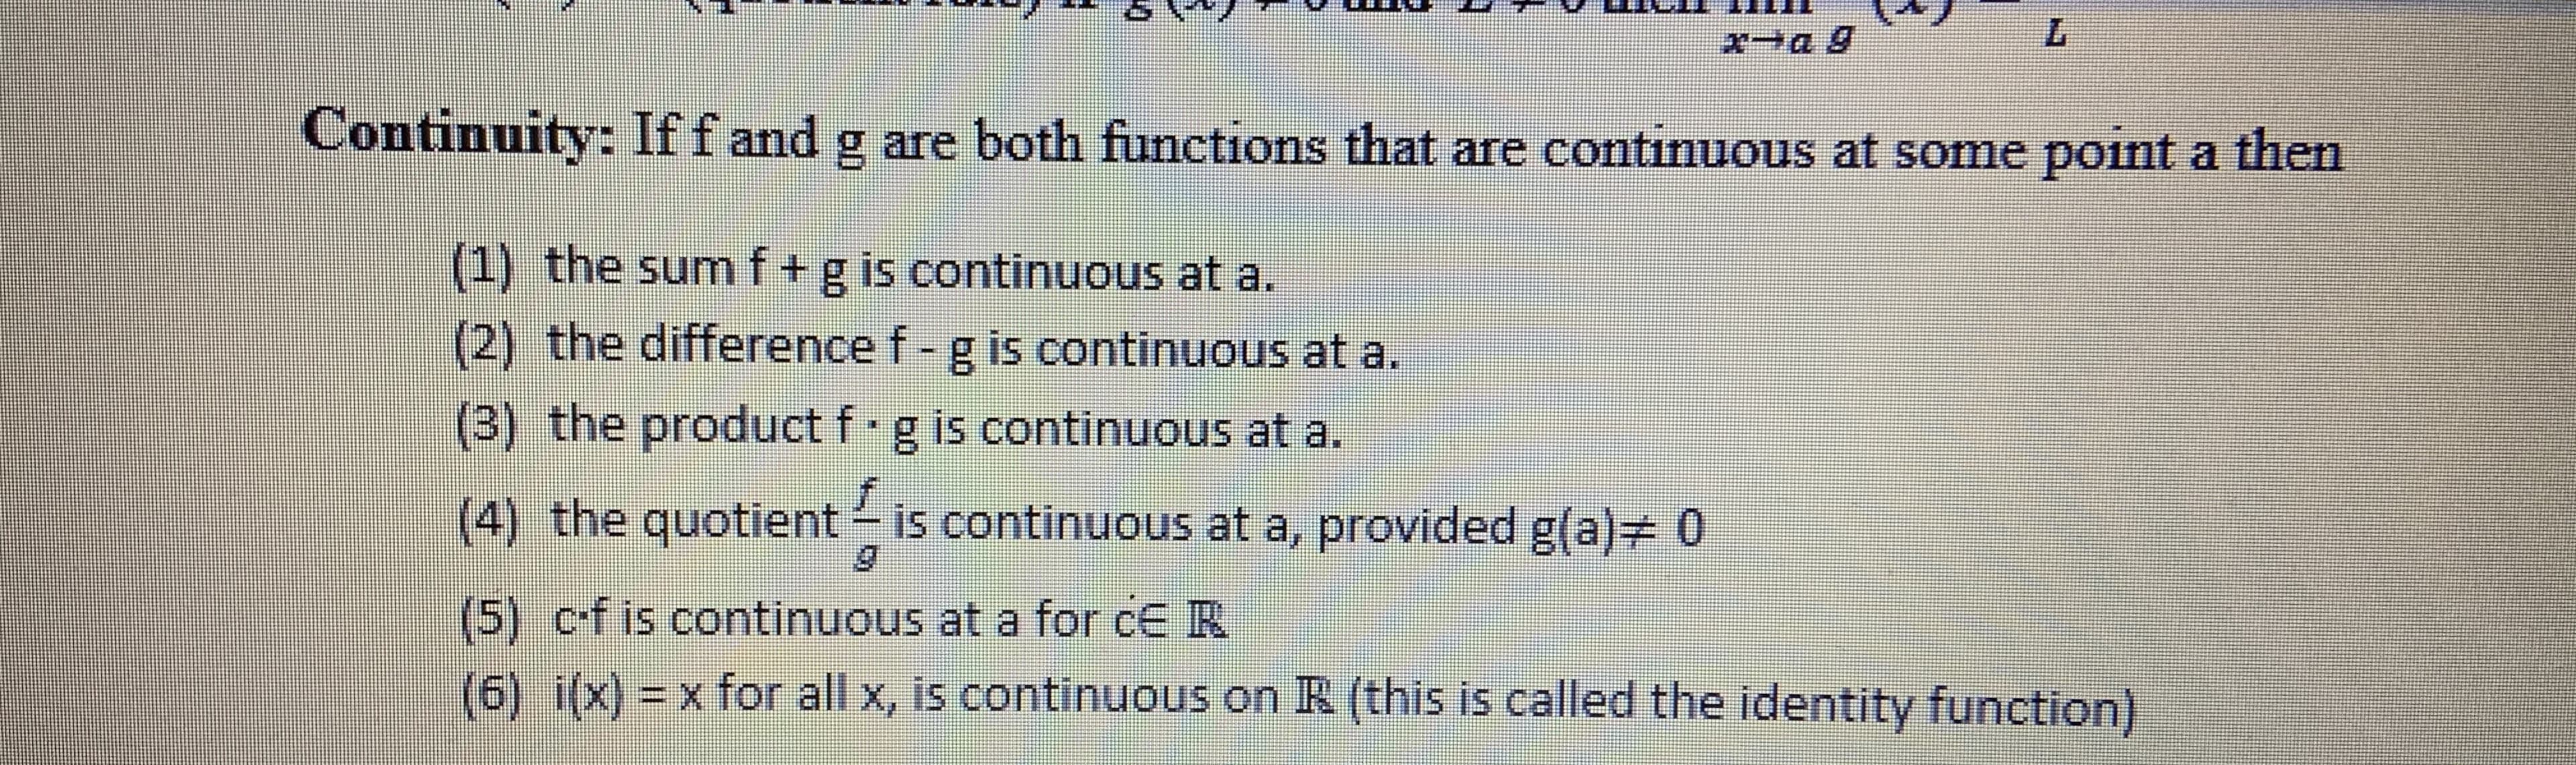 Continuity: Iff and g are both functions that are continuous at some point a then
